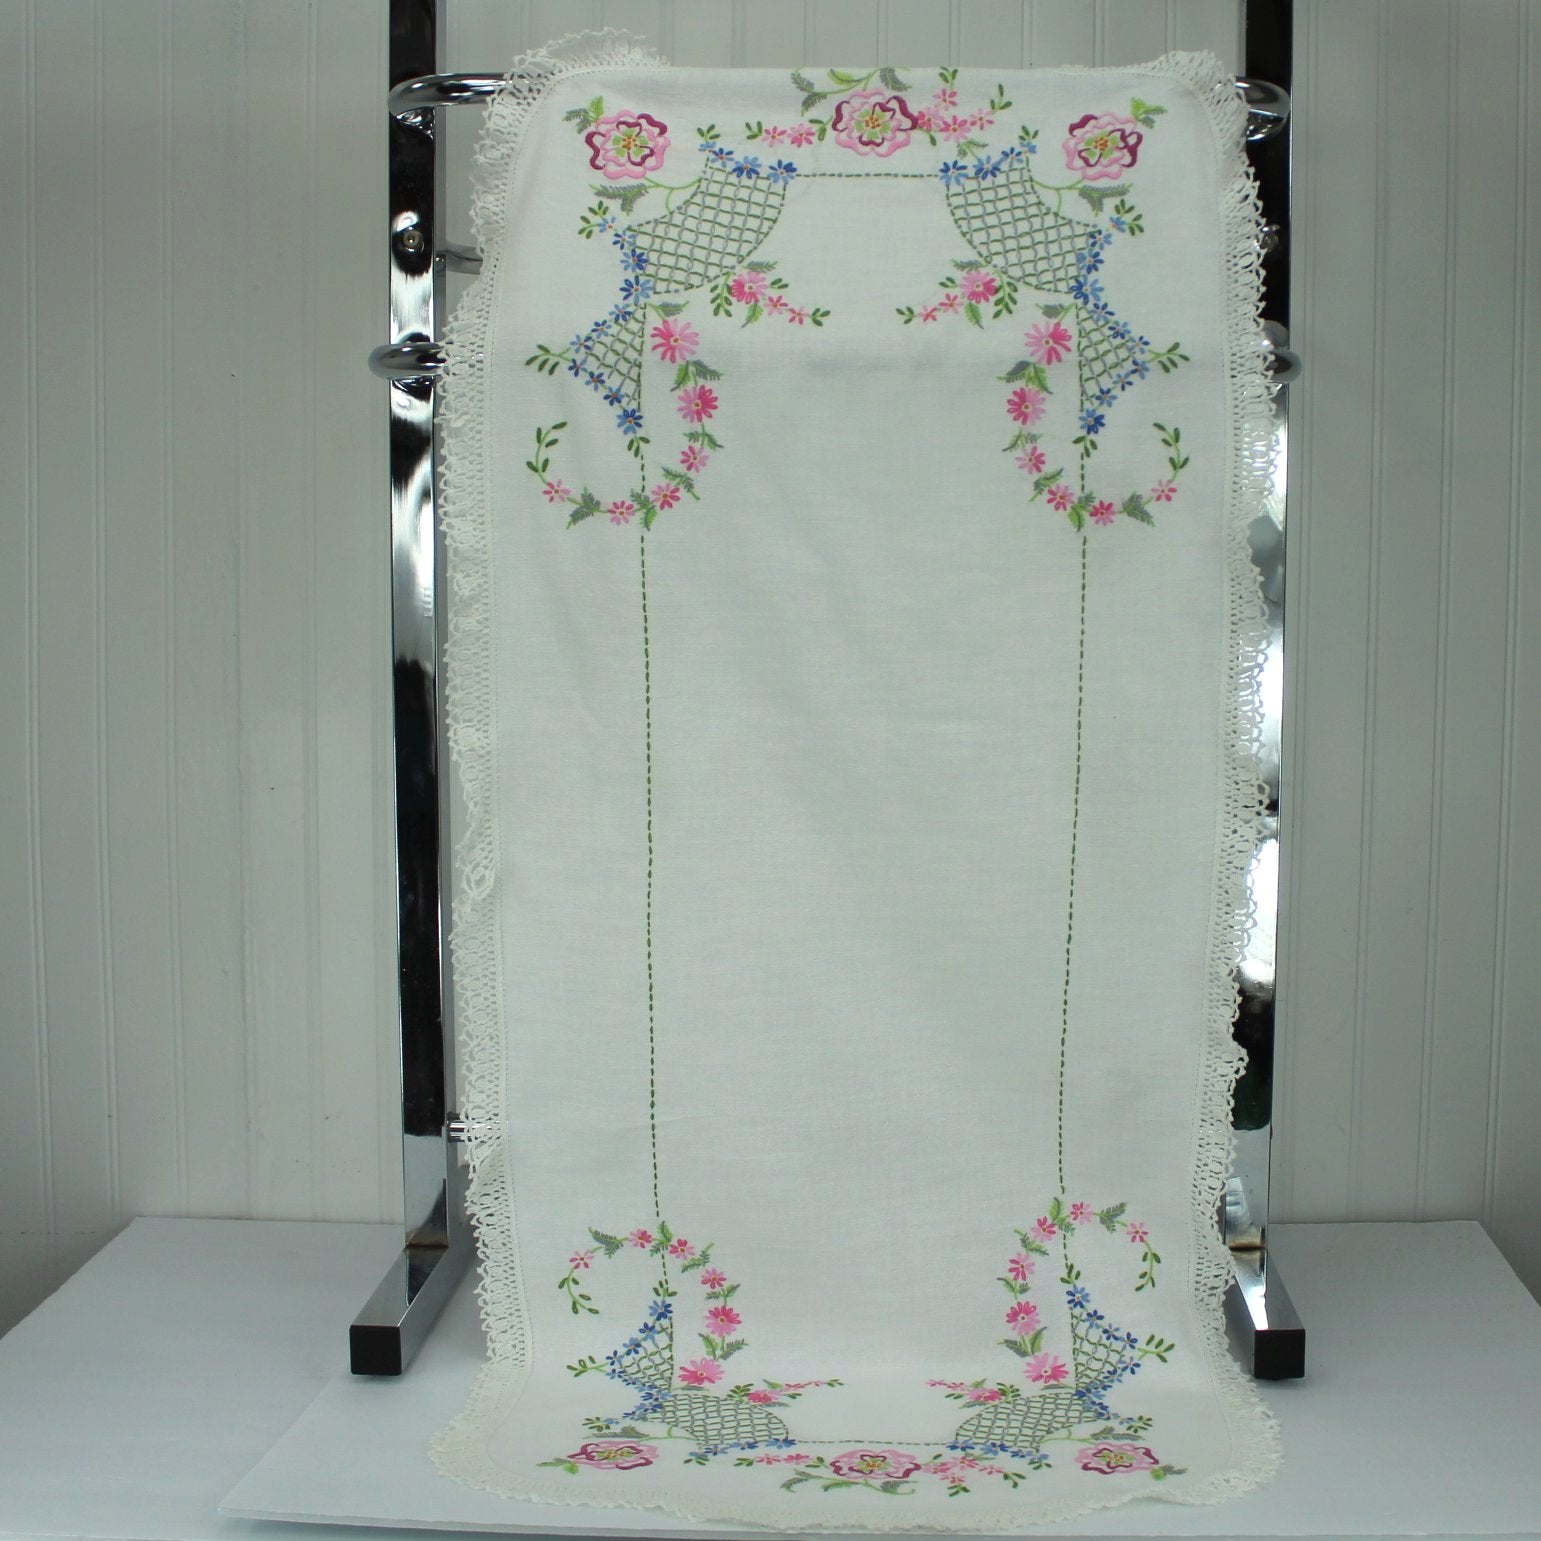 Lace Embroidery Table Runner Shawl White Heavy Cotton Pastel Hand Work